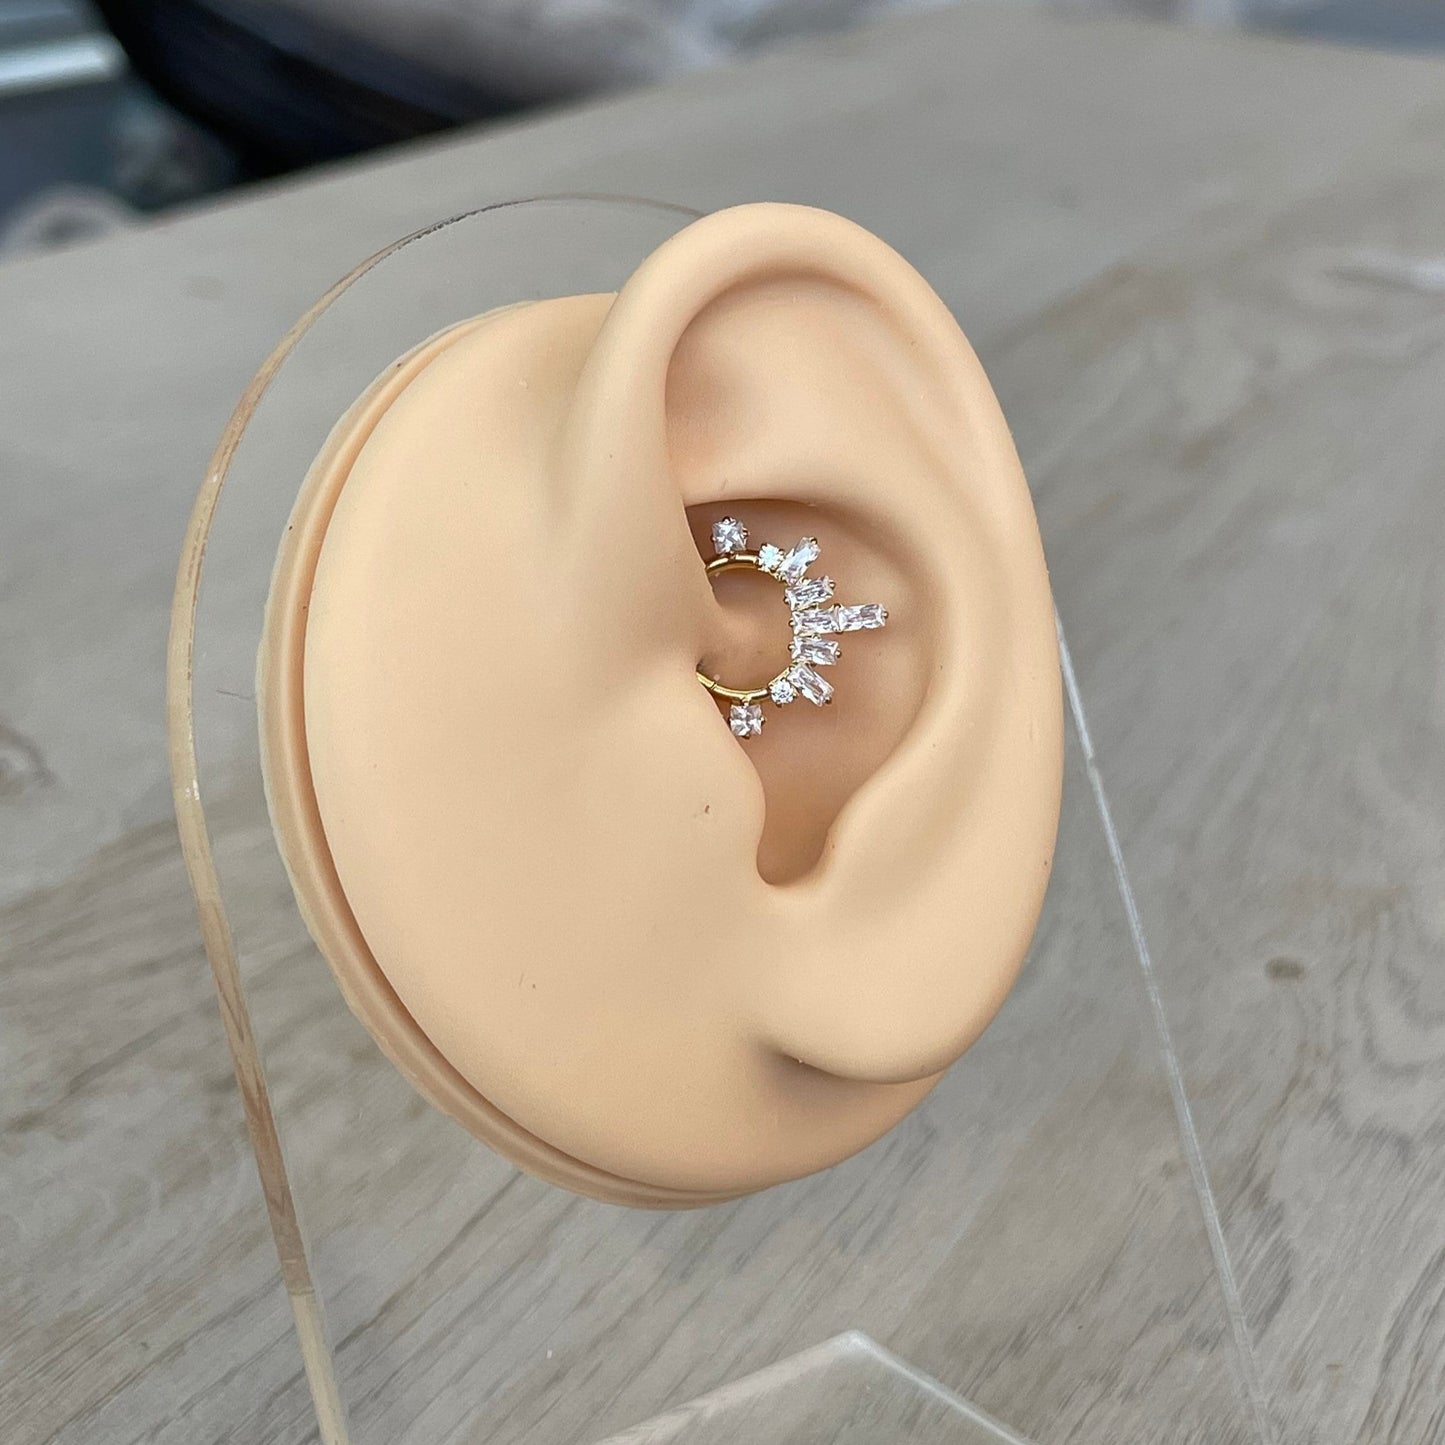 Cute Daith Earring (16G | 8mm or 10mm | Surgical Steel | Silver or Gold)